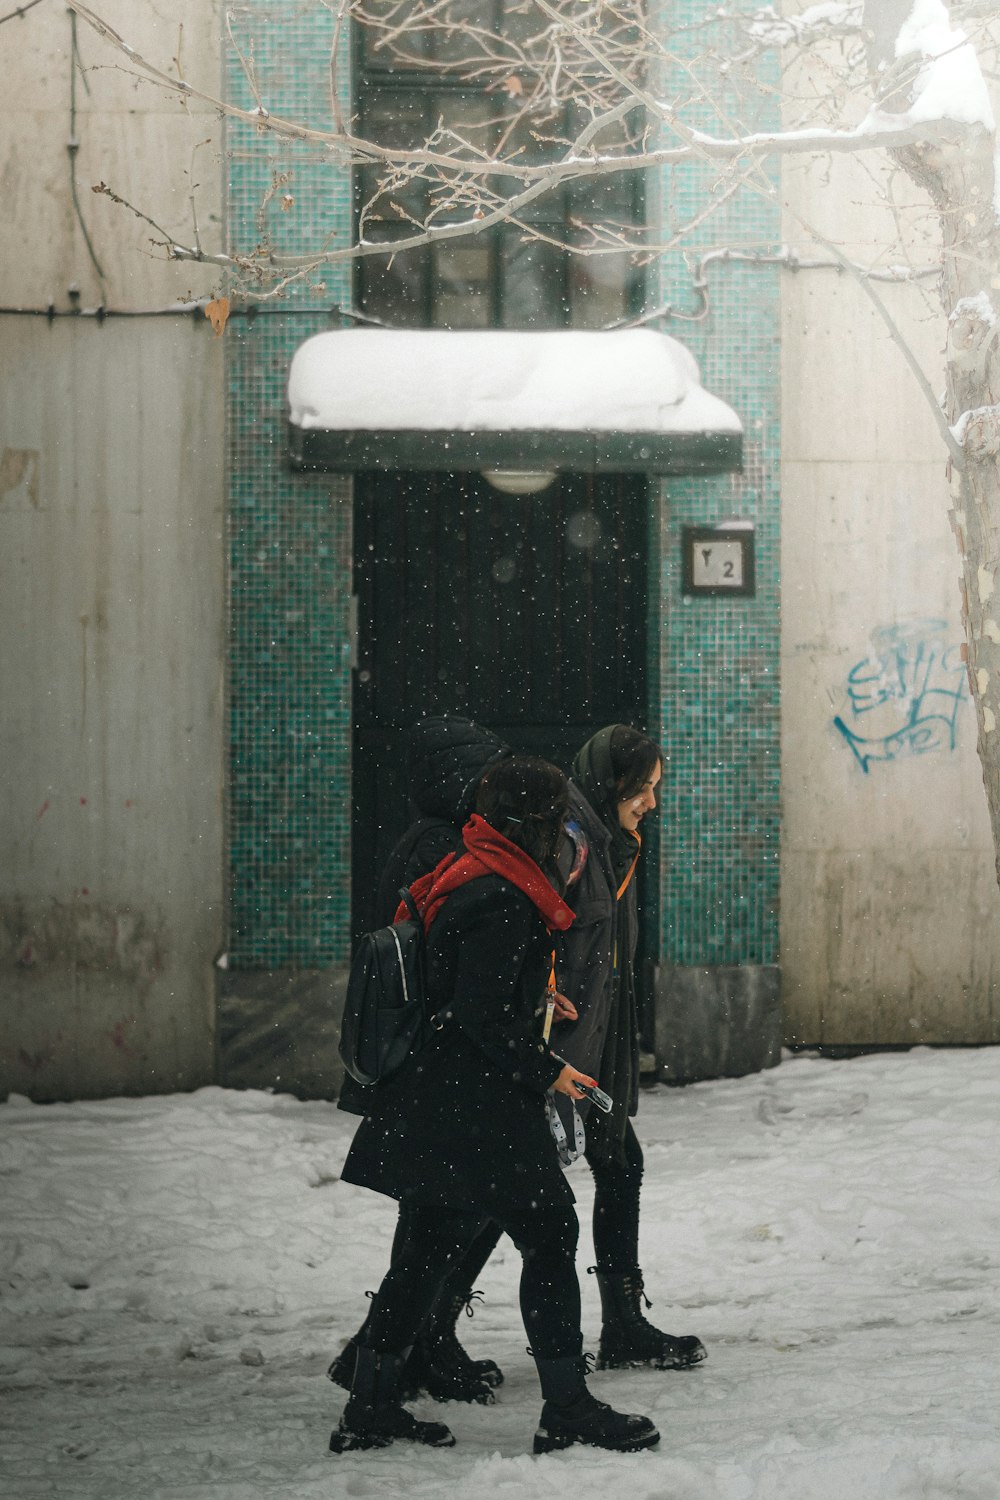 two people walking in the snow in front of a building